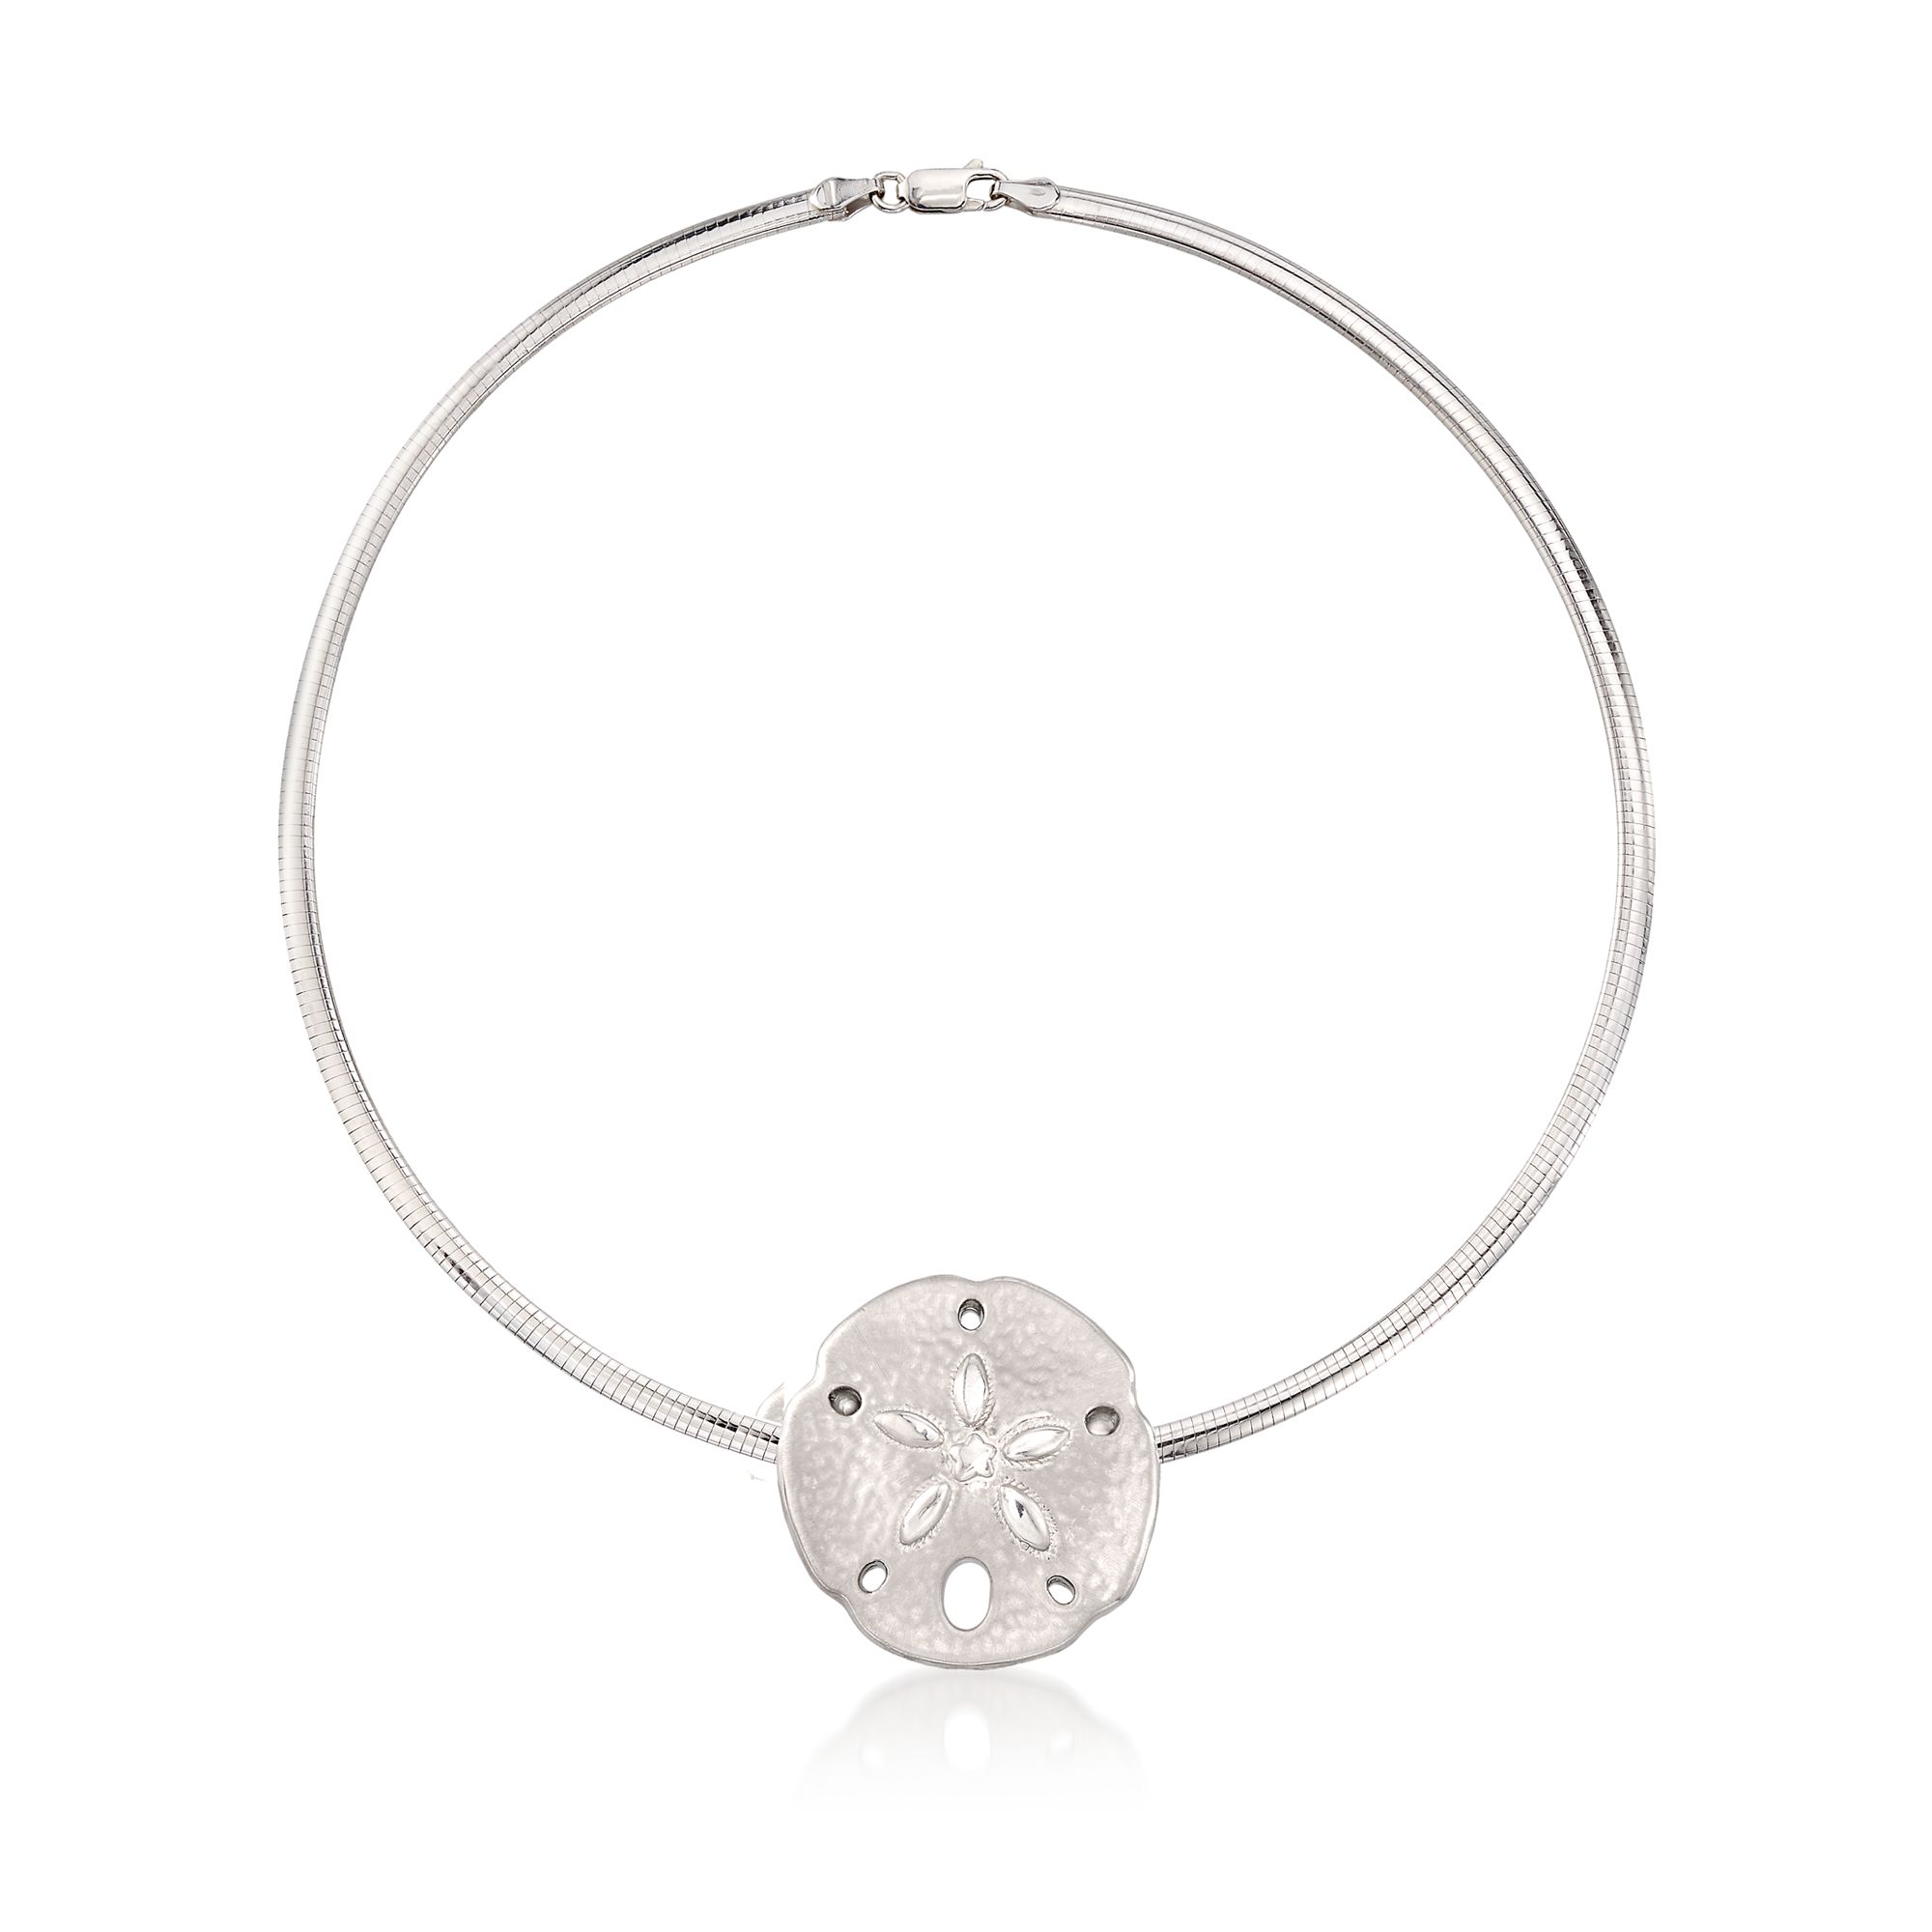 Jewels Obsession Sand Dollar Pendant Sterling Silver 34mm Sand Dollar with 7.5 Charm Bracelet